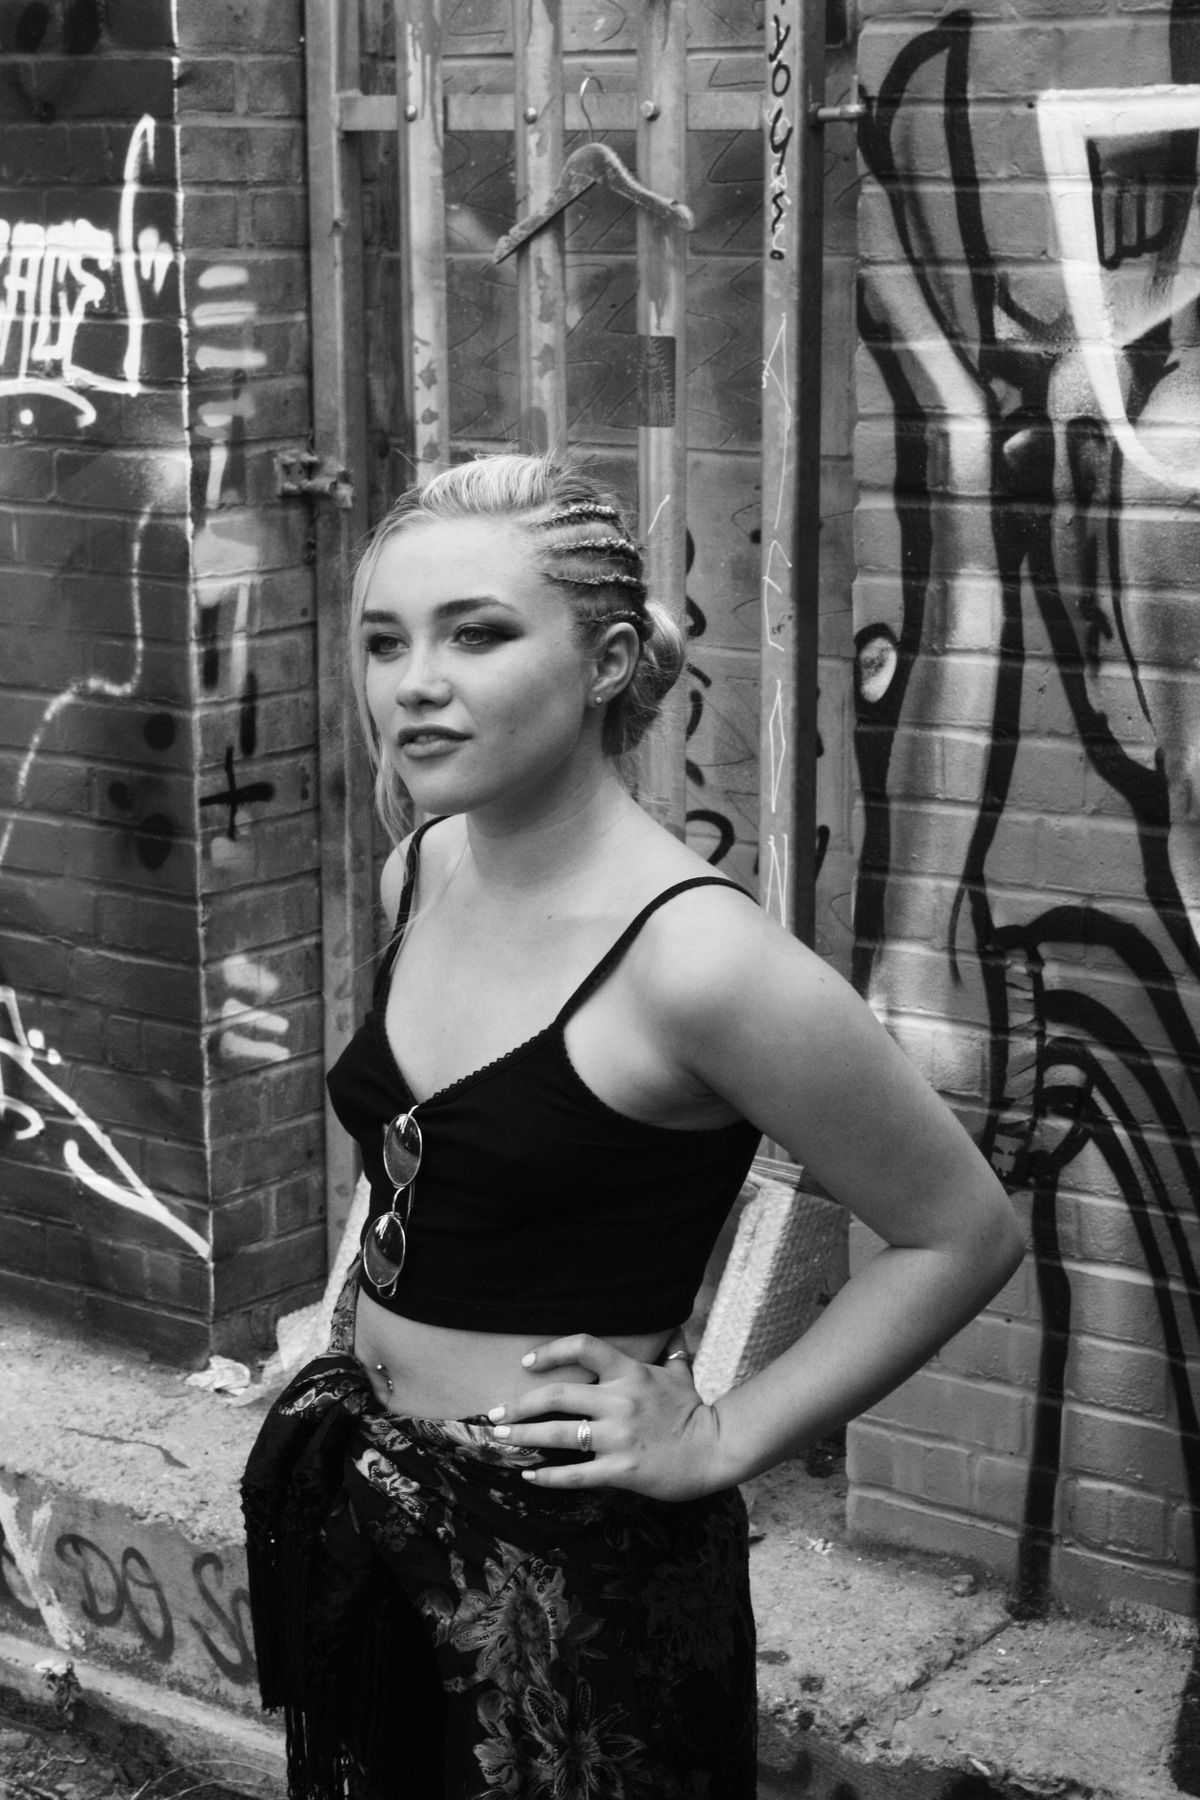 A woman with her hands on her hips in front of a graffiti wall. - Florence Pugh